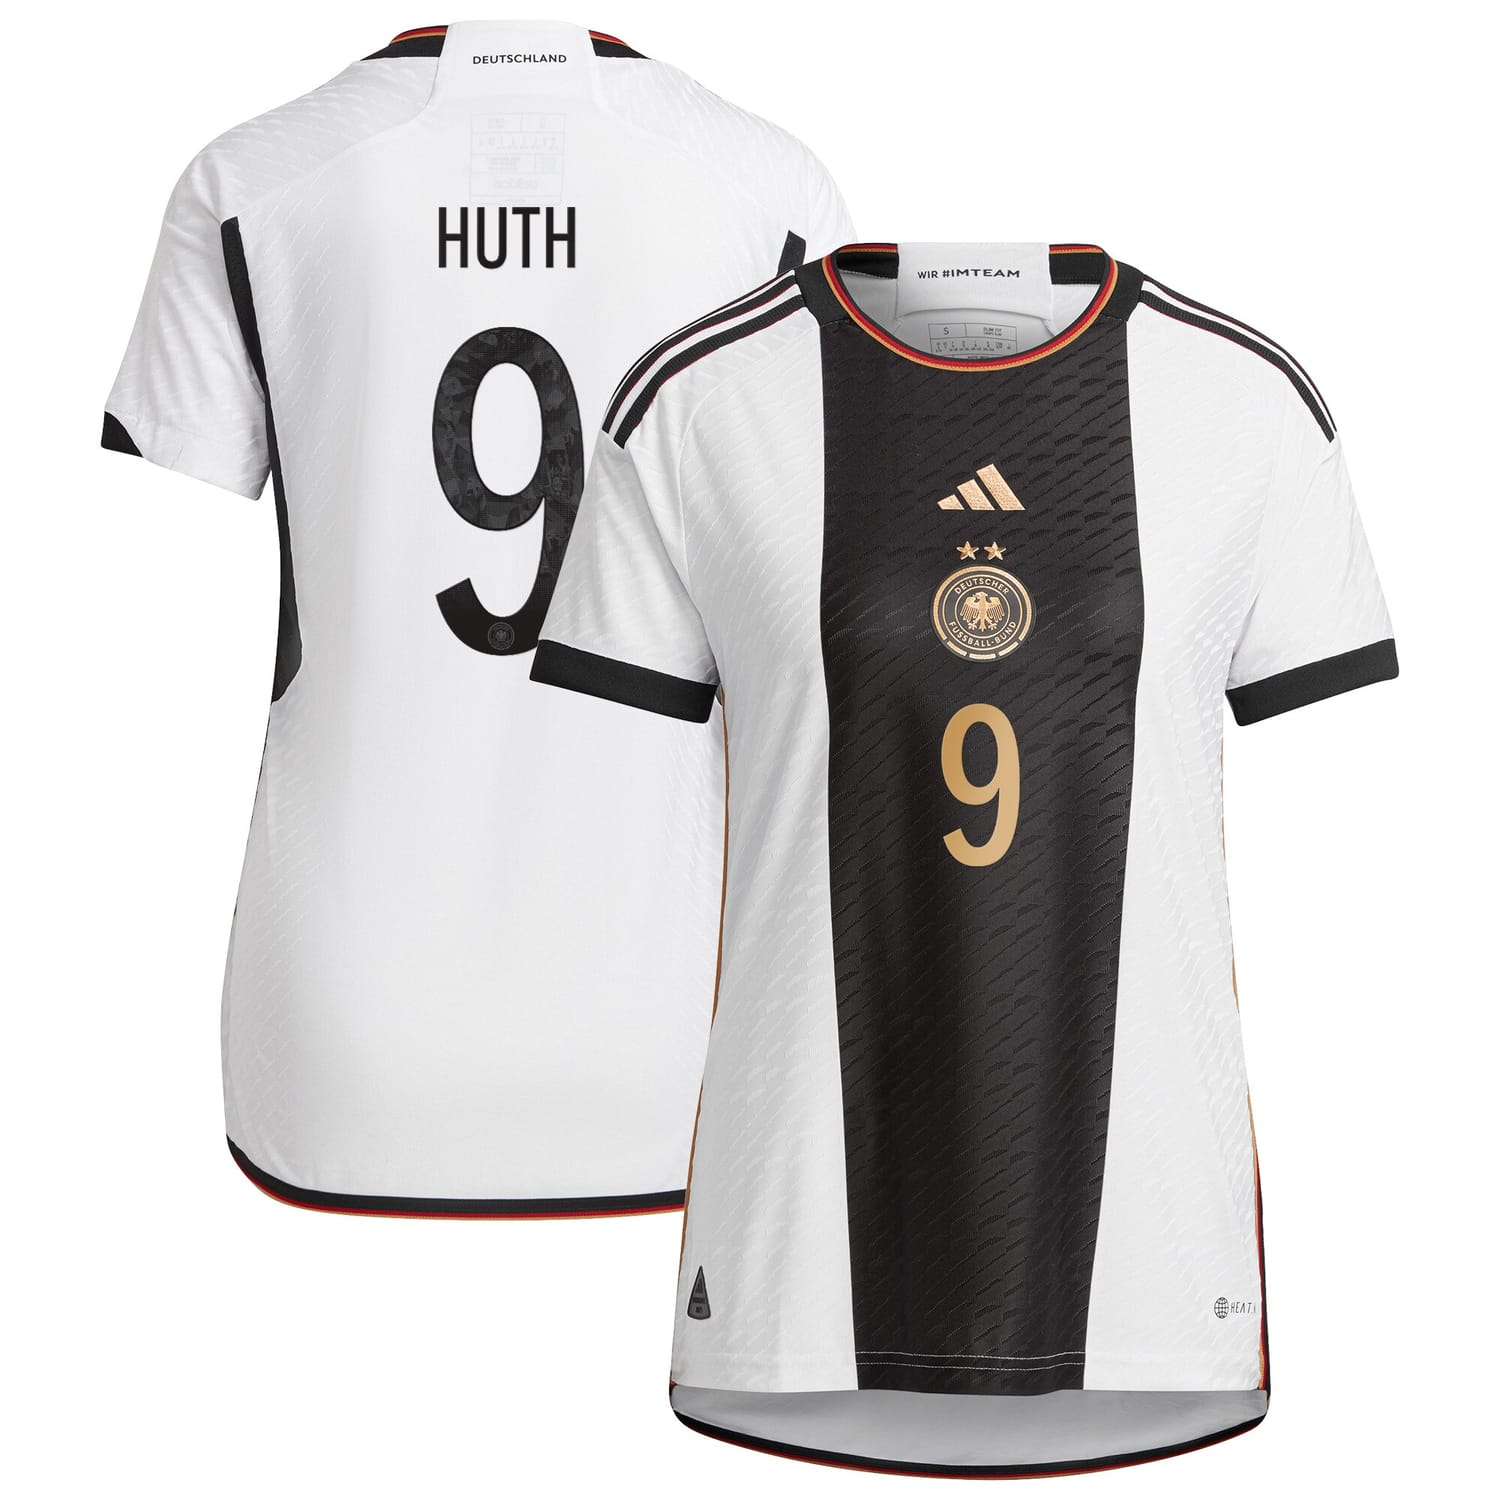 Germany National Team Home Authentic Jersey Shirt player Svenja Huth 9 printing for Women